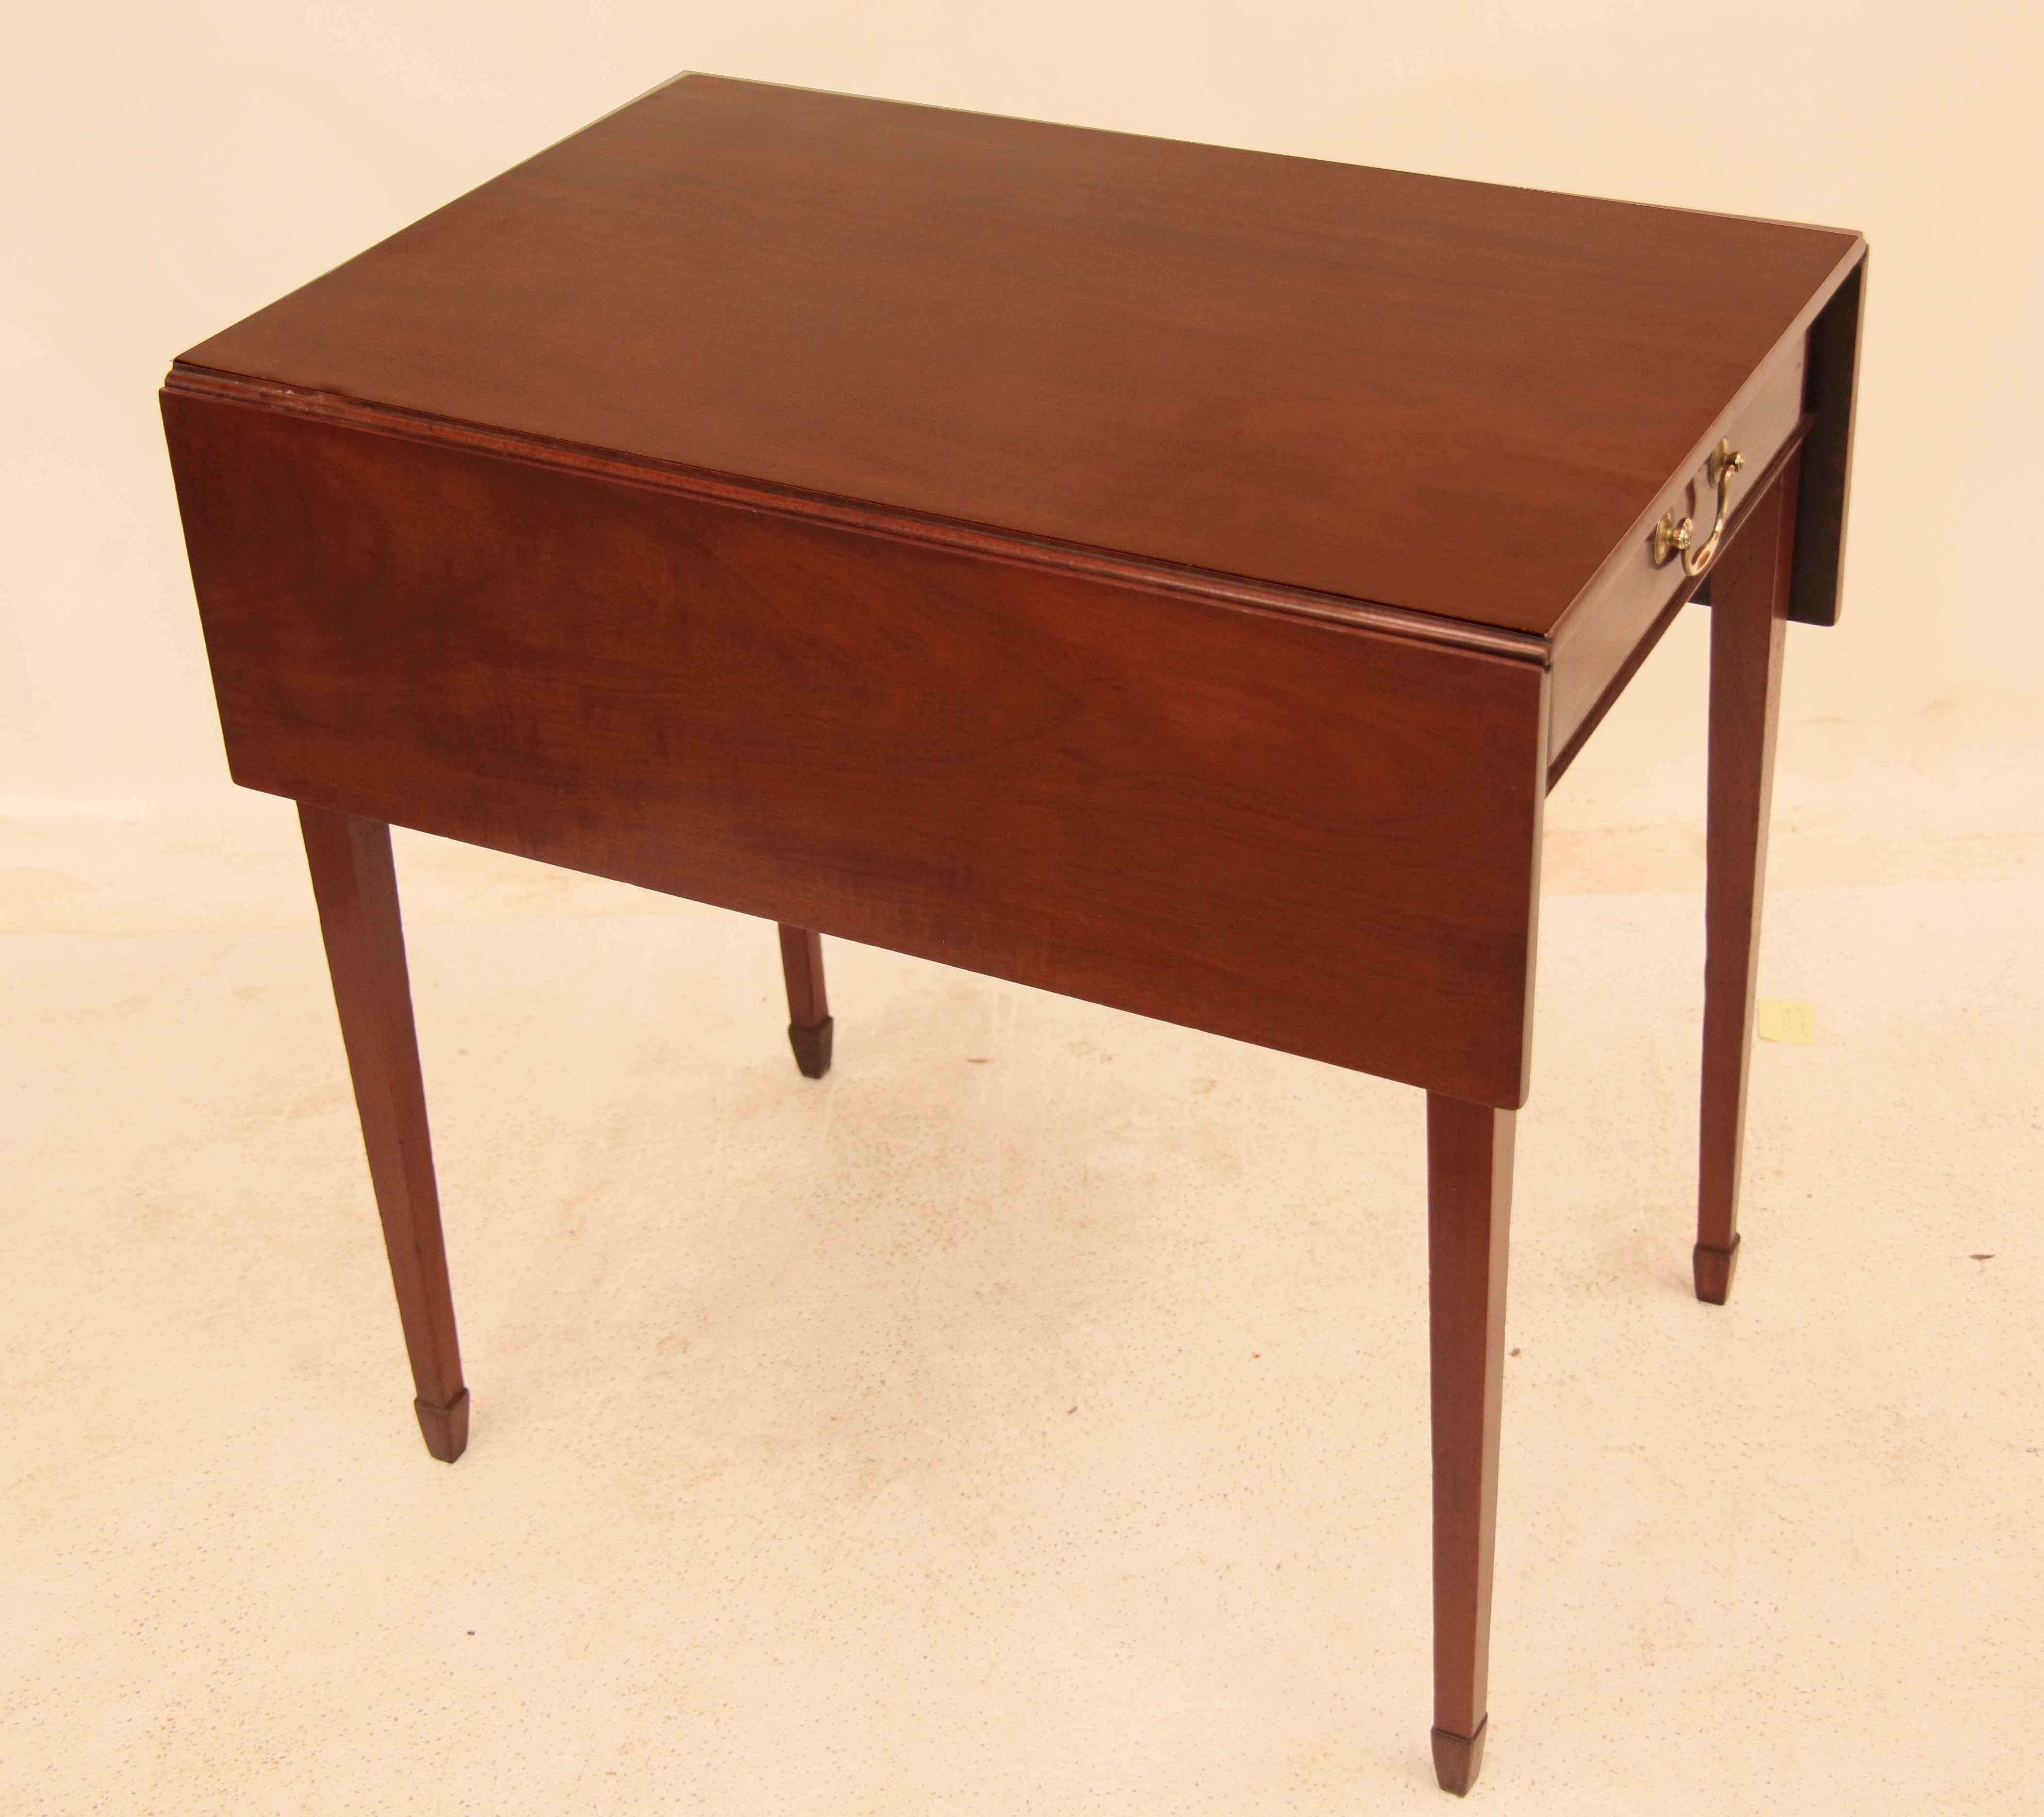 English Hepplewhite pembroke table, the top and leaves with rich mahogany color and patina; single drawer with swan neck brass pull. The tapered legs terminate with spade feet. Of note, the leaves are held up by double 